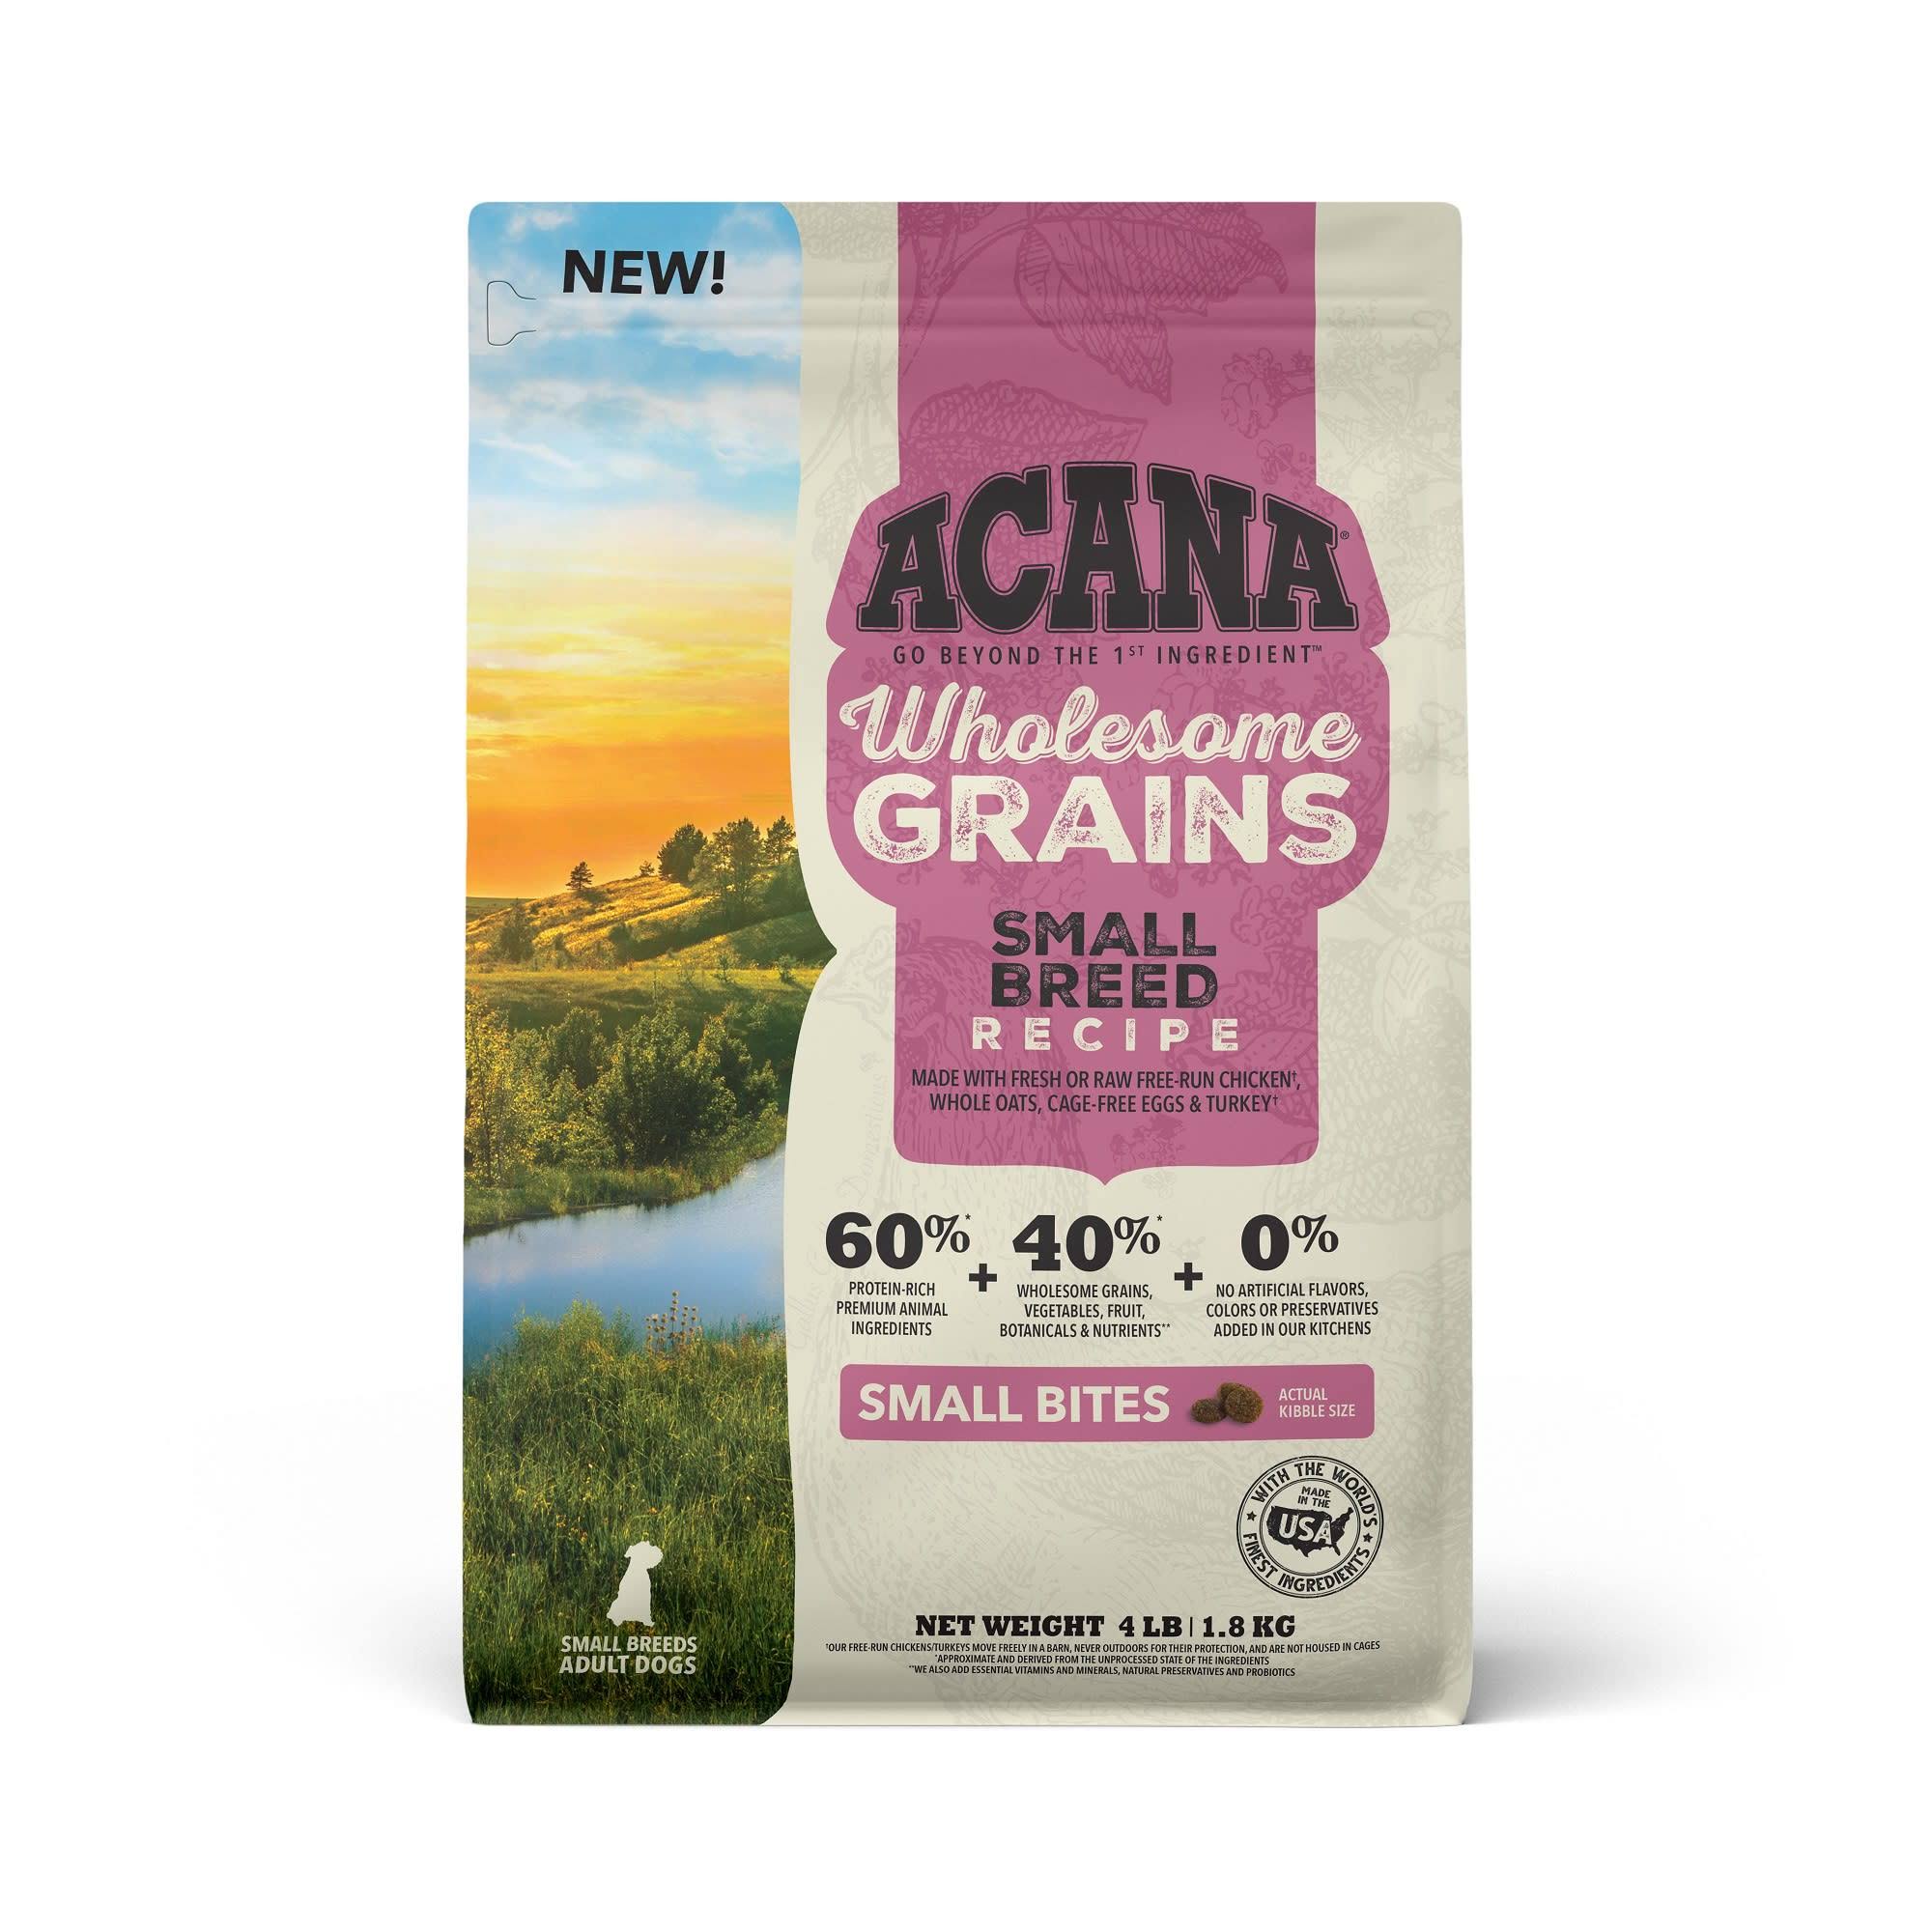 Acana Wholesome Grains, Small Breed Recipe Dry Dog Food 4lbs